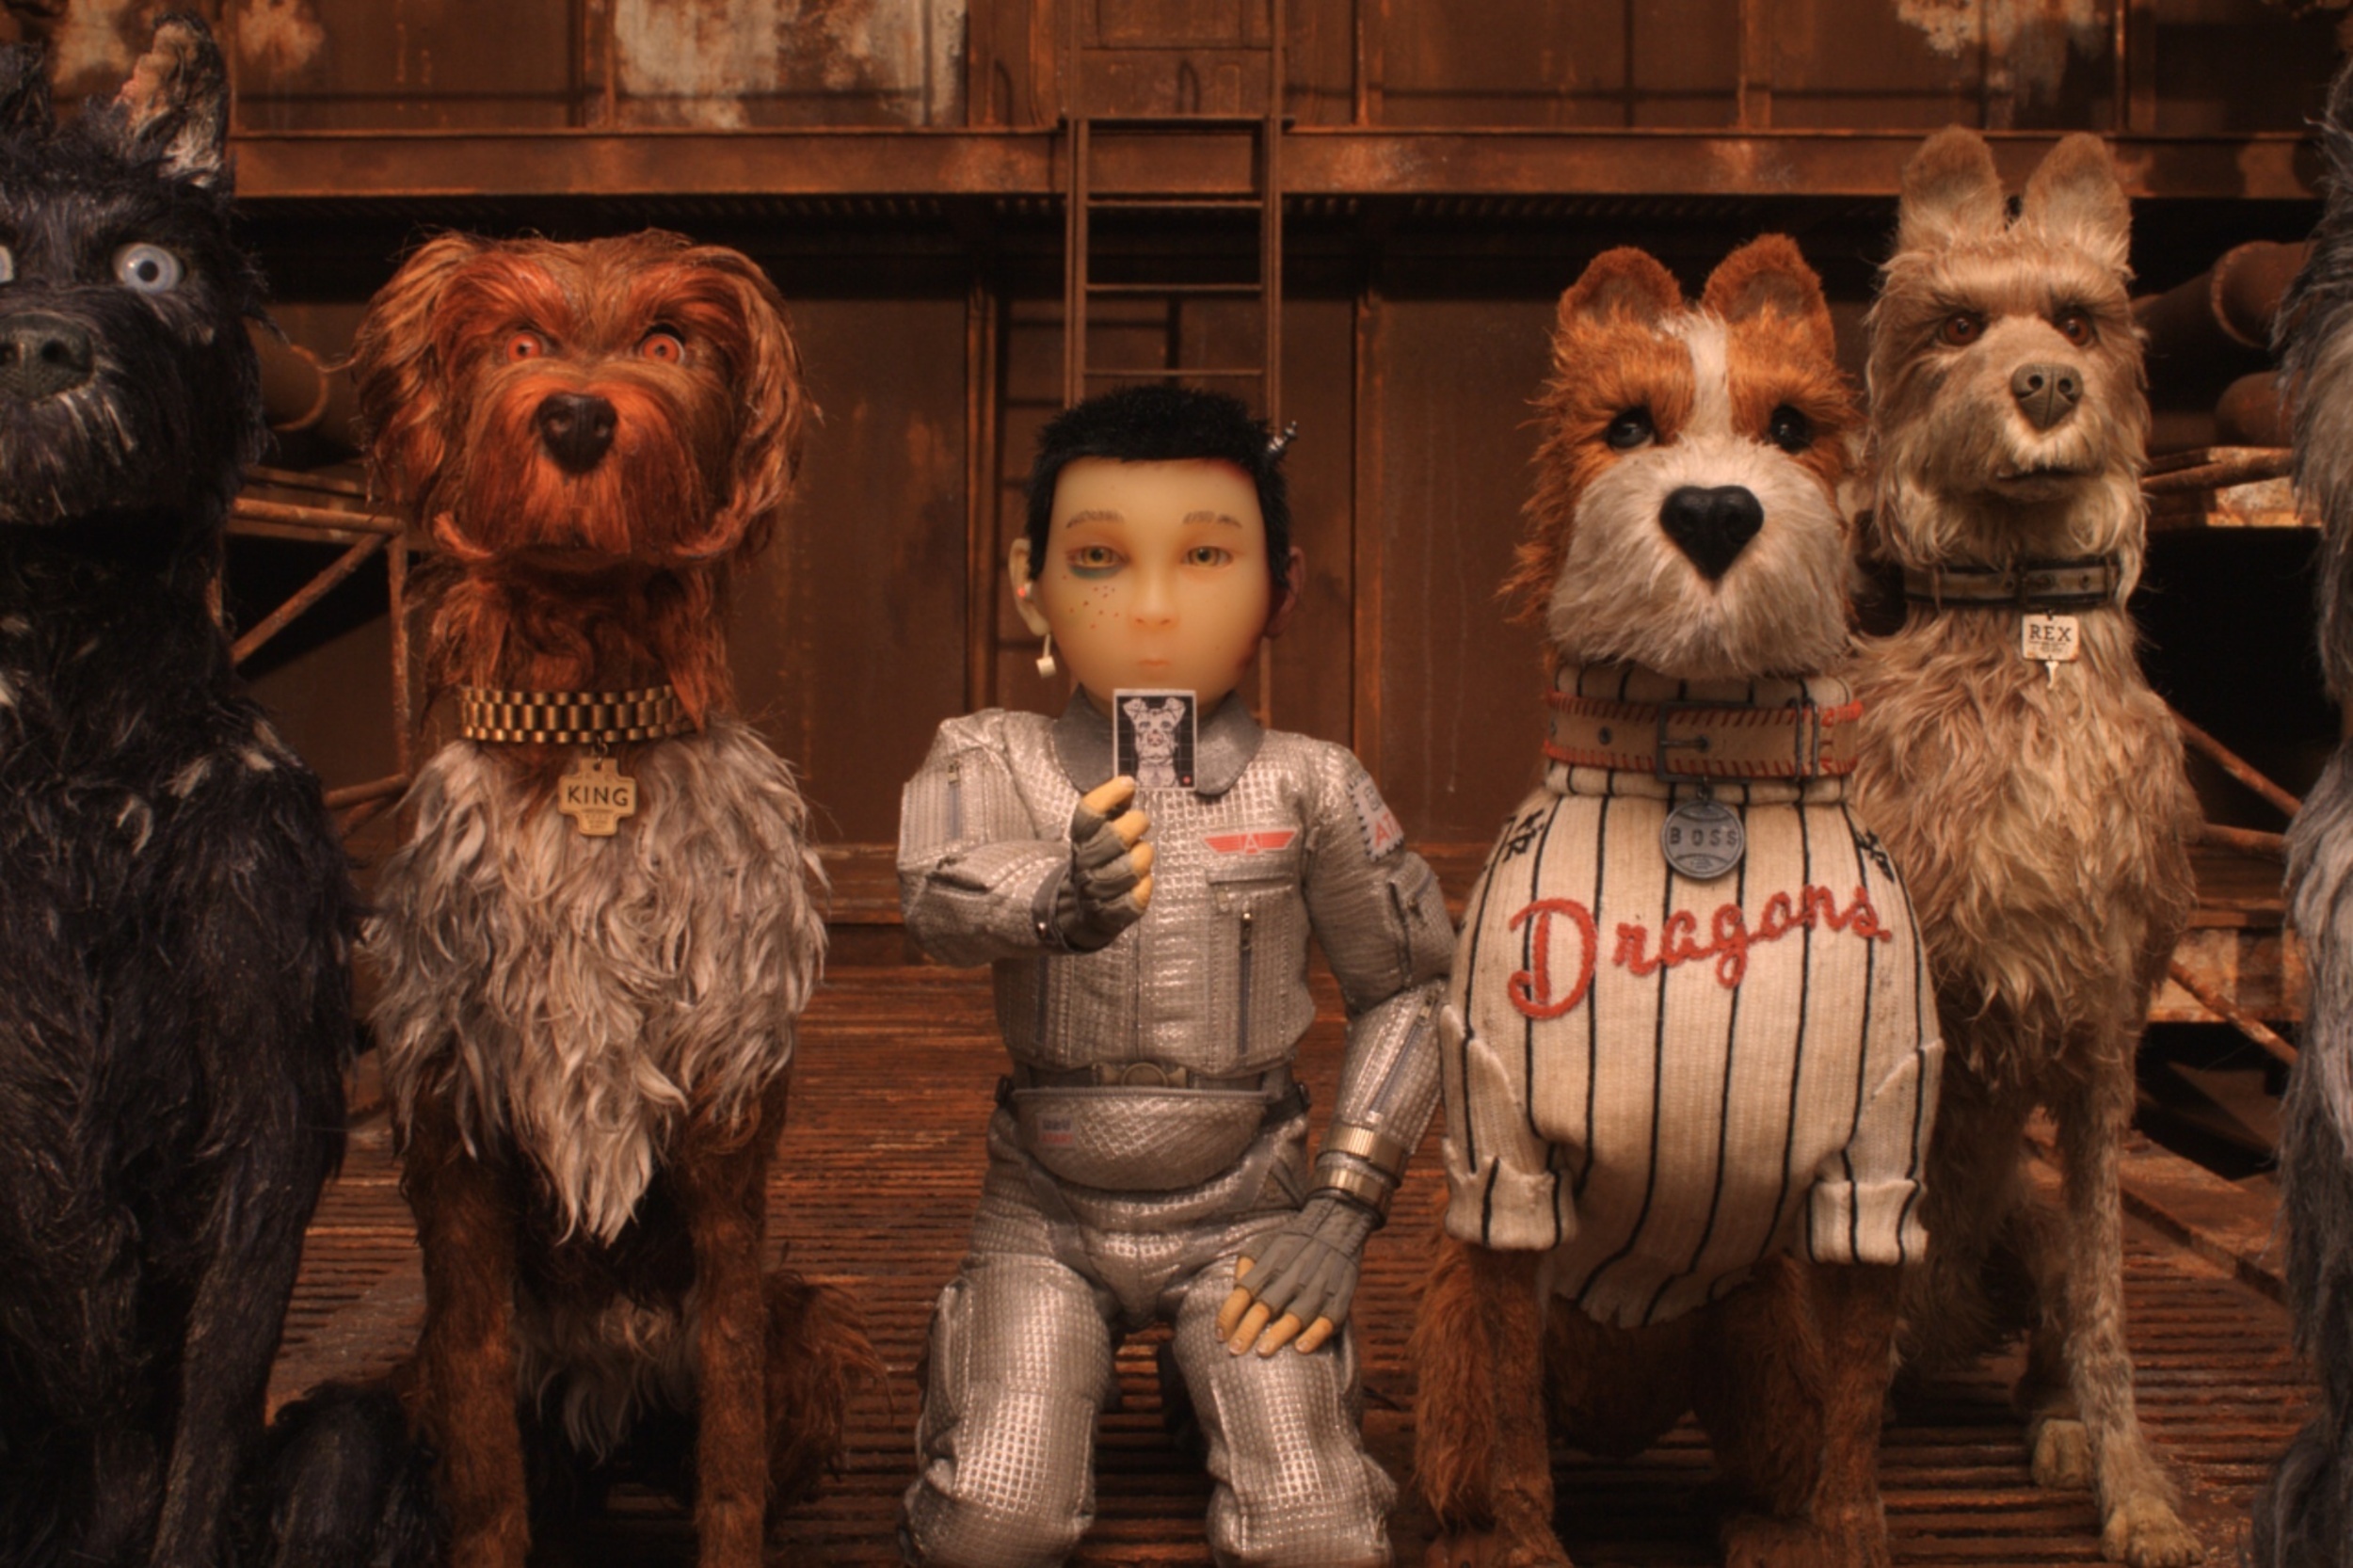 <p>Almost ten years after <em>Fantastic Mr. Fox</em>, Wes Anderson returned to stop-motion animation with <em>Isle of Dogs</em>. Set in the fictional Japanese city of Megasaki, the film sees all dogs banished to an island after a canine flu outbreak as one boy searches for his missing dog. Despite being animated, Anderson’s film isn’t necessarily targeted towards children. The dogs aren’t cute but instead are scruffy and rough around the edges, and the film also features mature themes. </p><p><a href='https://www.msn.com/en-us/community/channel/vid-cj9pqbr0vn9in2b6ddcd8sfgpfq6x6utp44fssrv6mc2gtybw0us'>Follow us on MSN to see more of our exclusive entertainment content.</a></p>